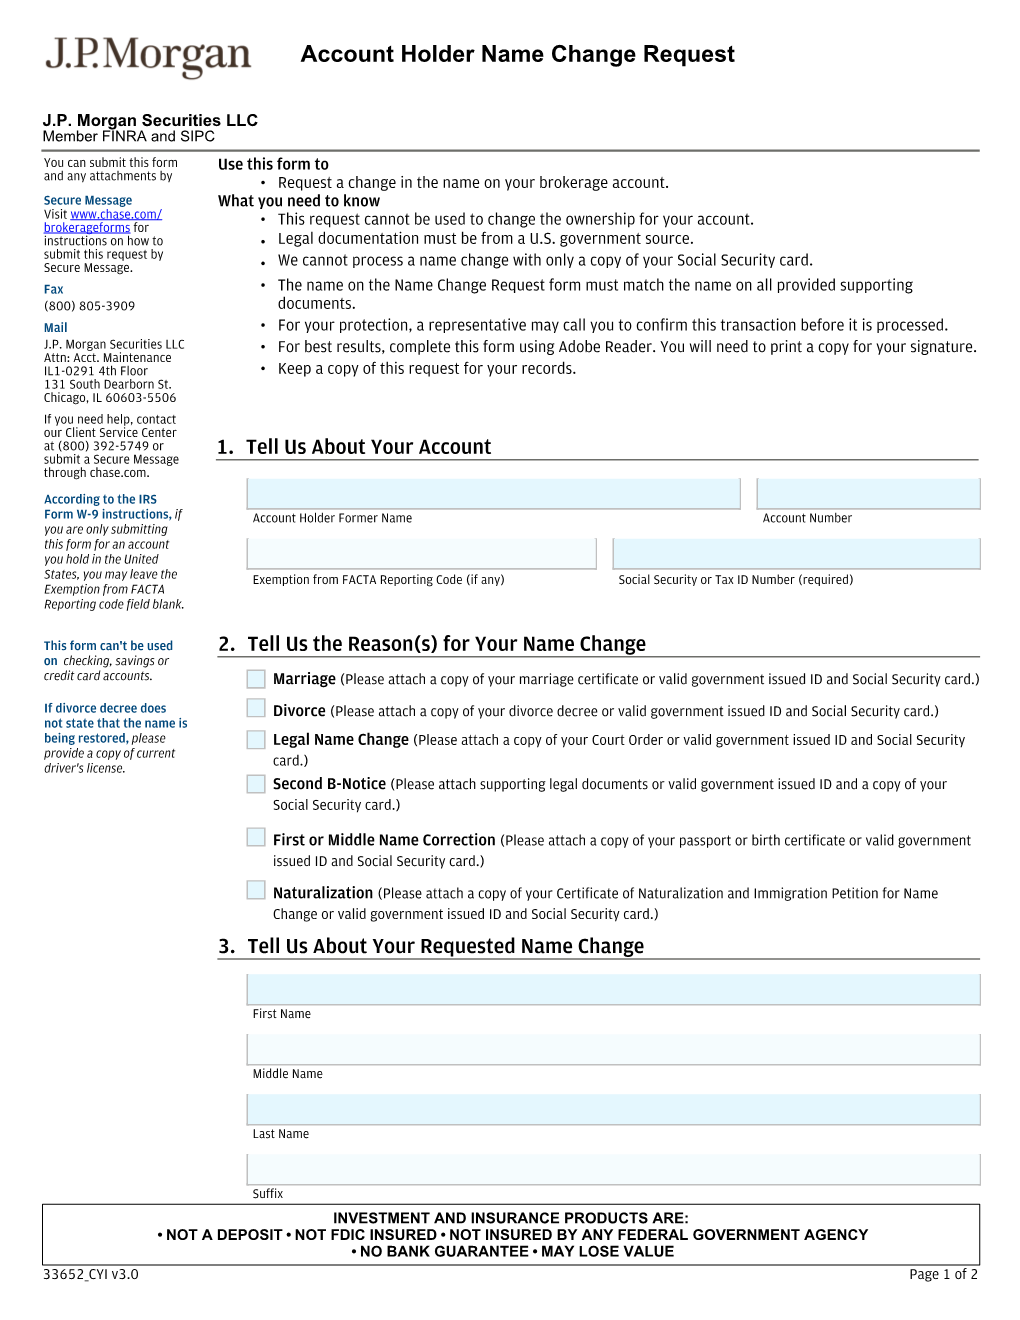 Account Holder Name Change Request Form